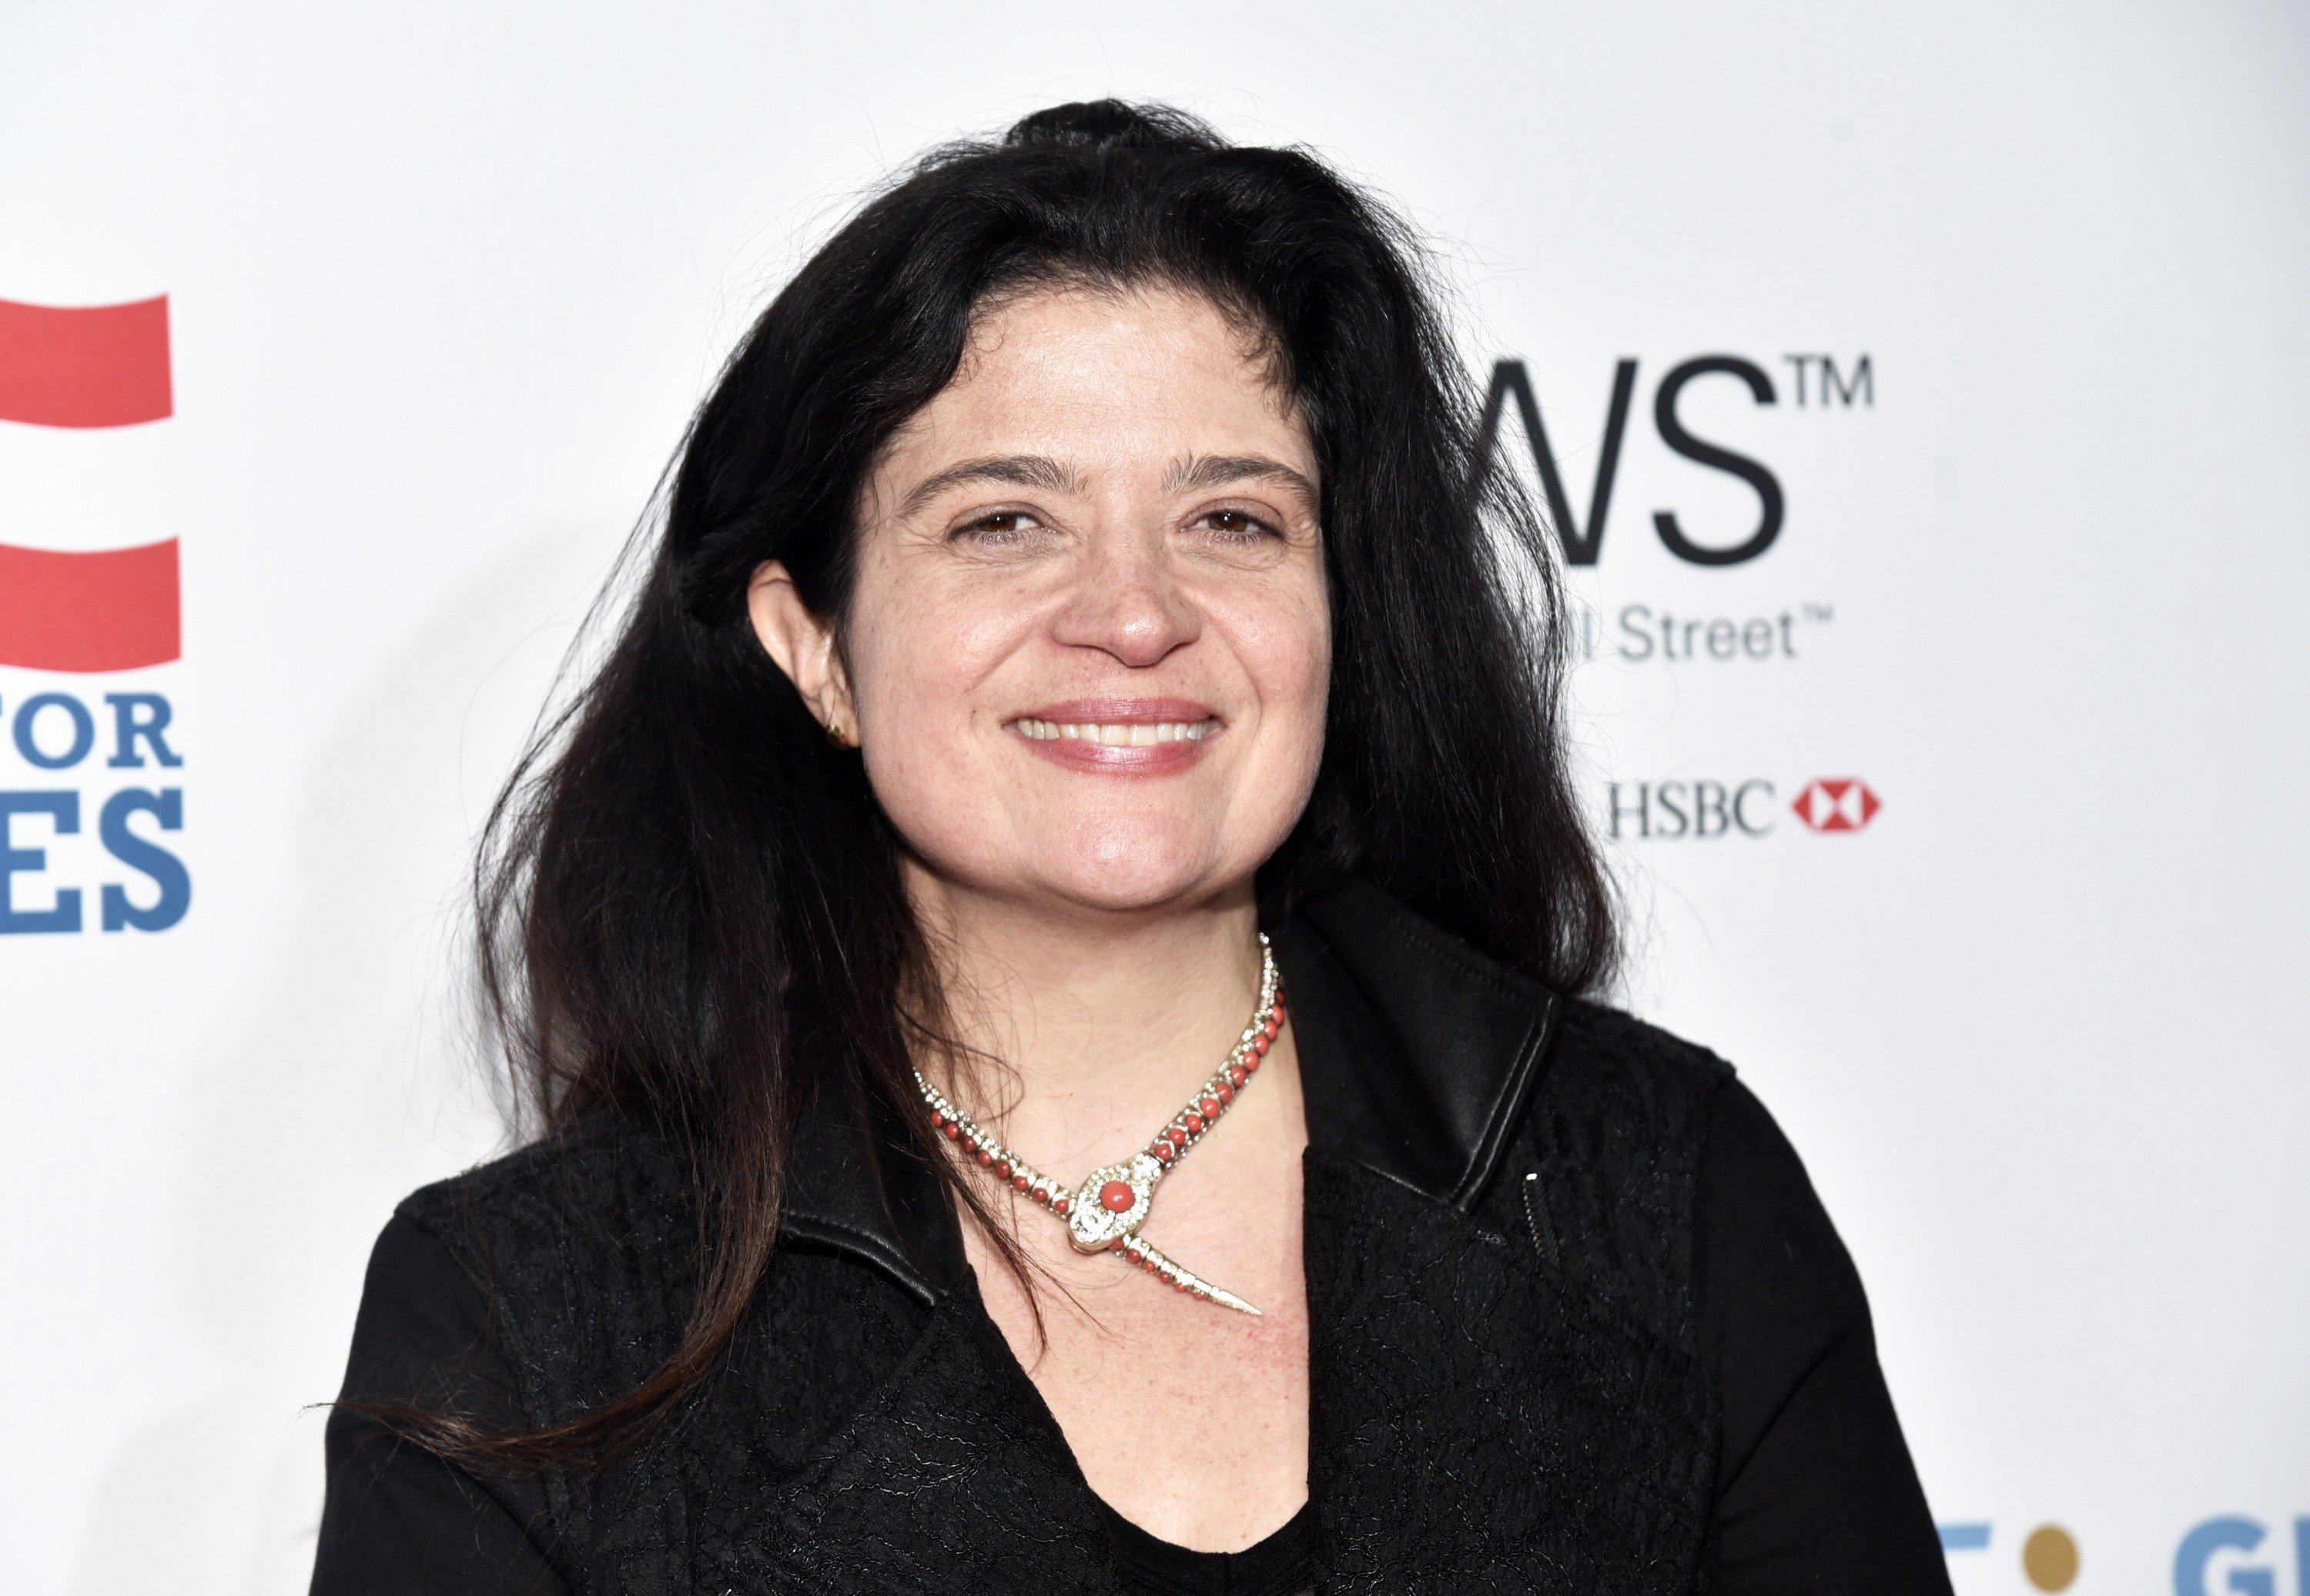 Alex Guarnaschelli during the 10th Annual Stand Up For Heroes Show at The Theater at Madison Square Garden on November 1, 2016 in New York City. / Source: Getty Images